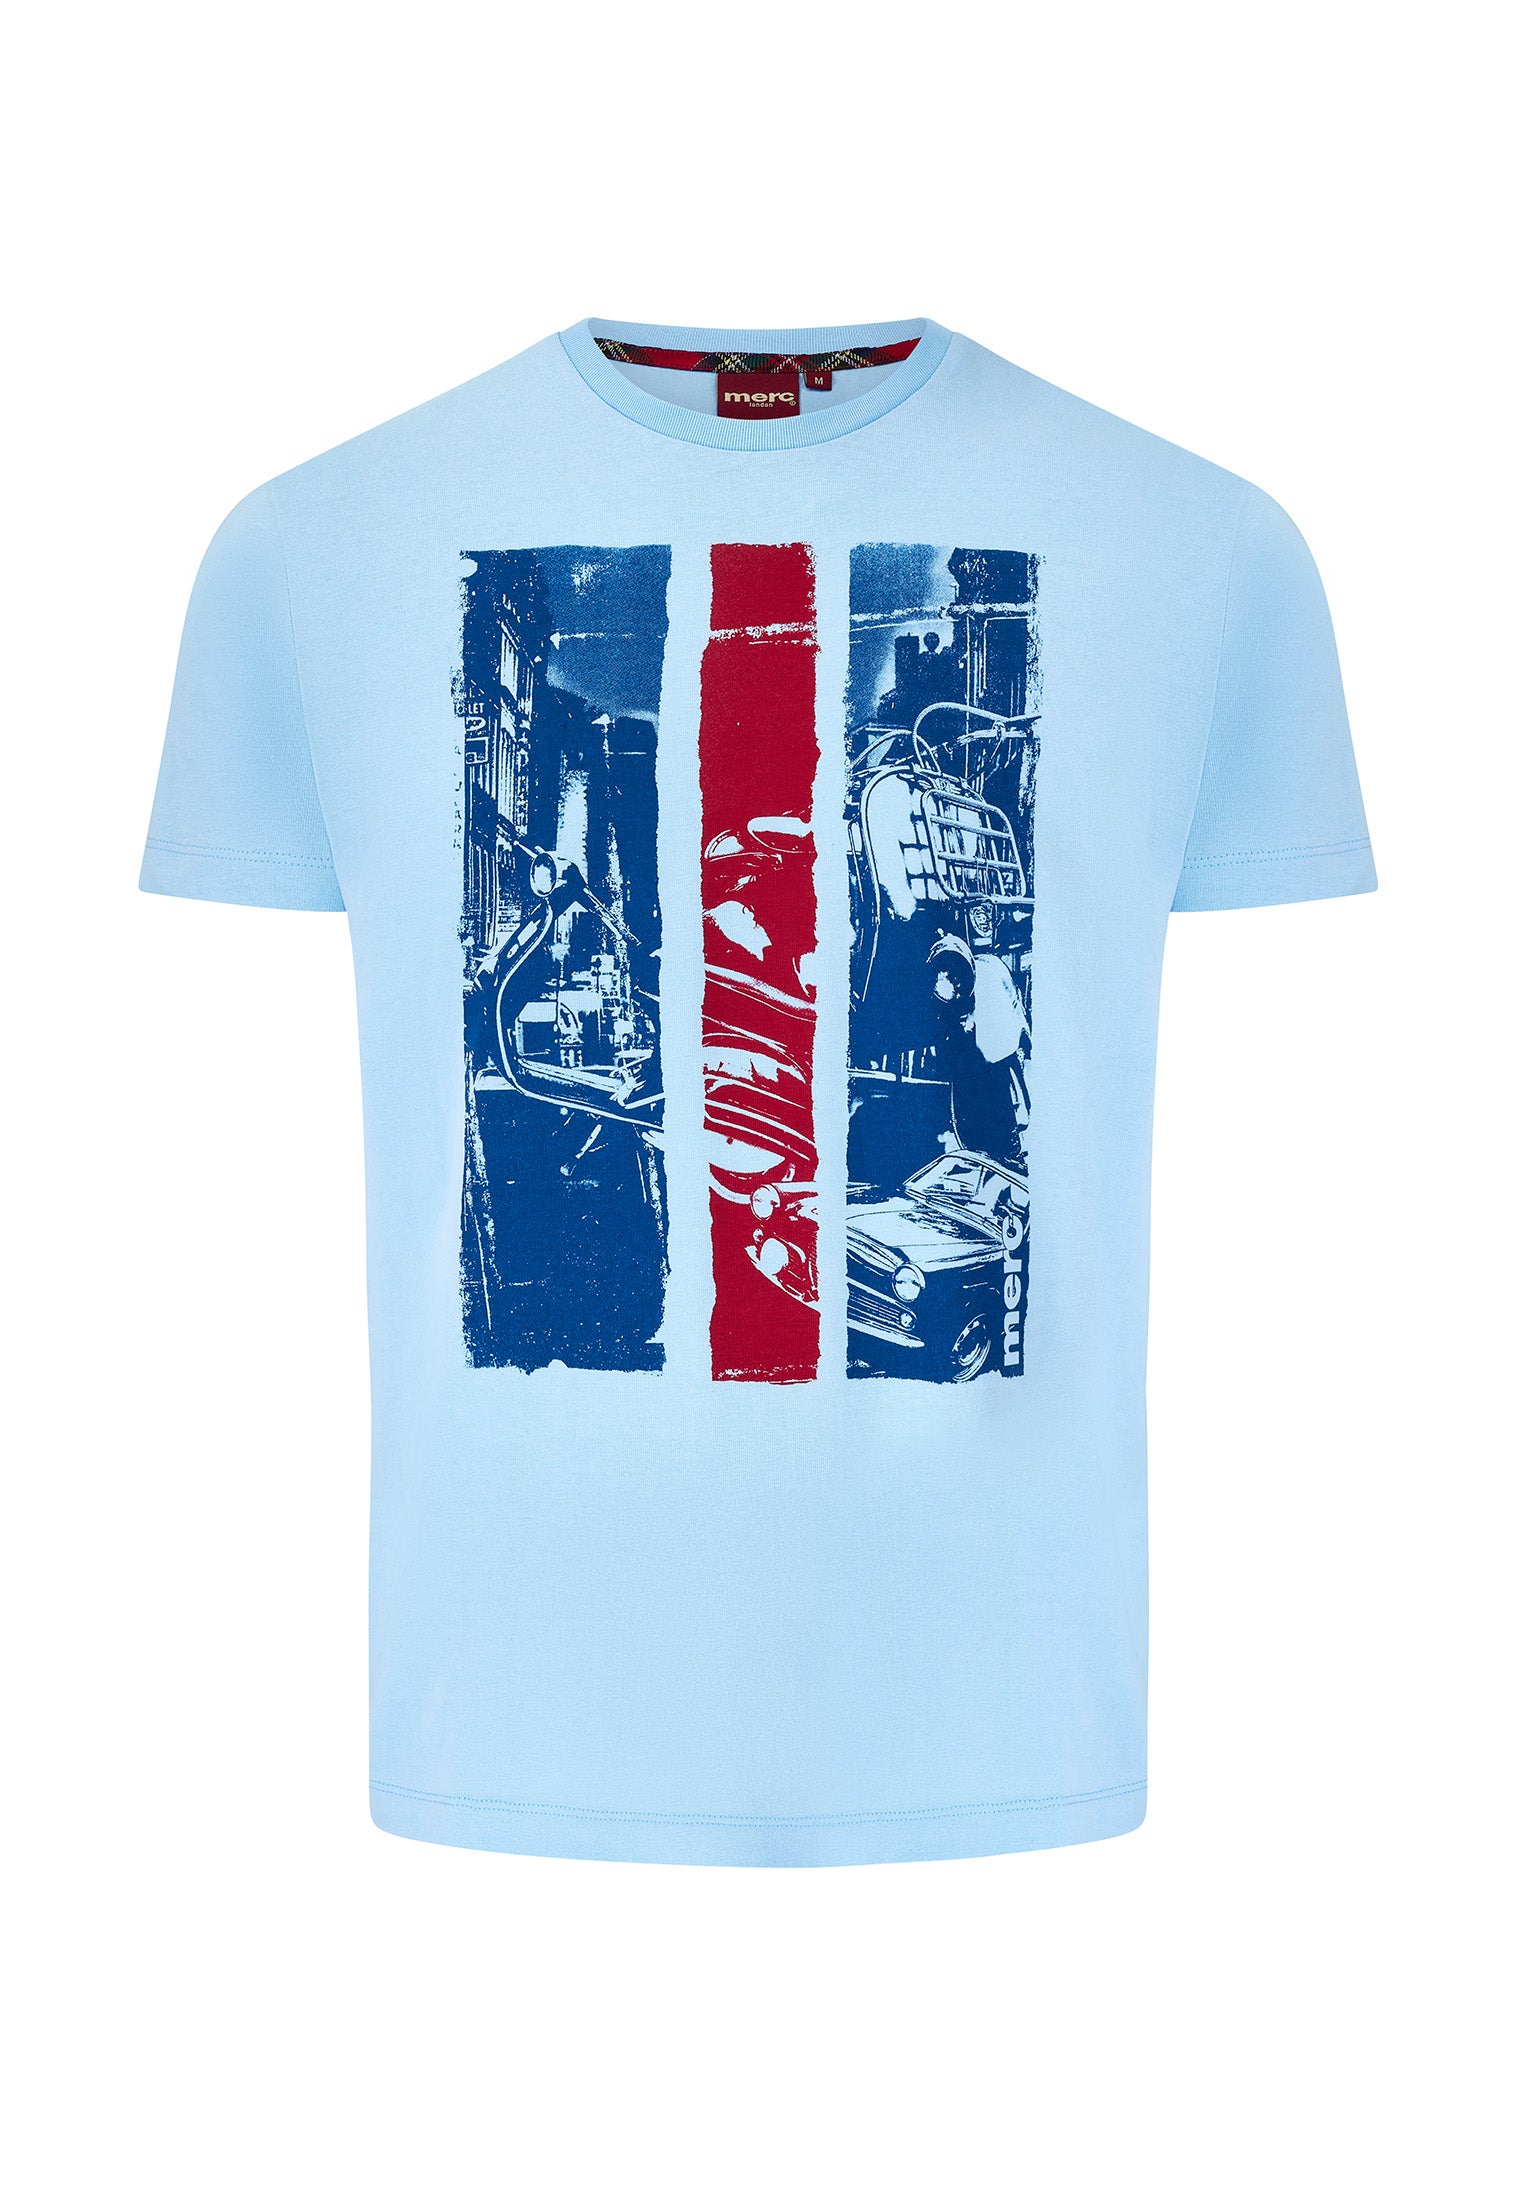 Printed Mens T-Shirt by Merc in Baby Blue